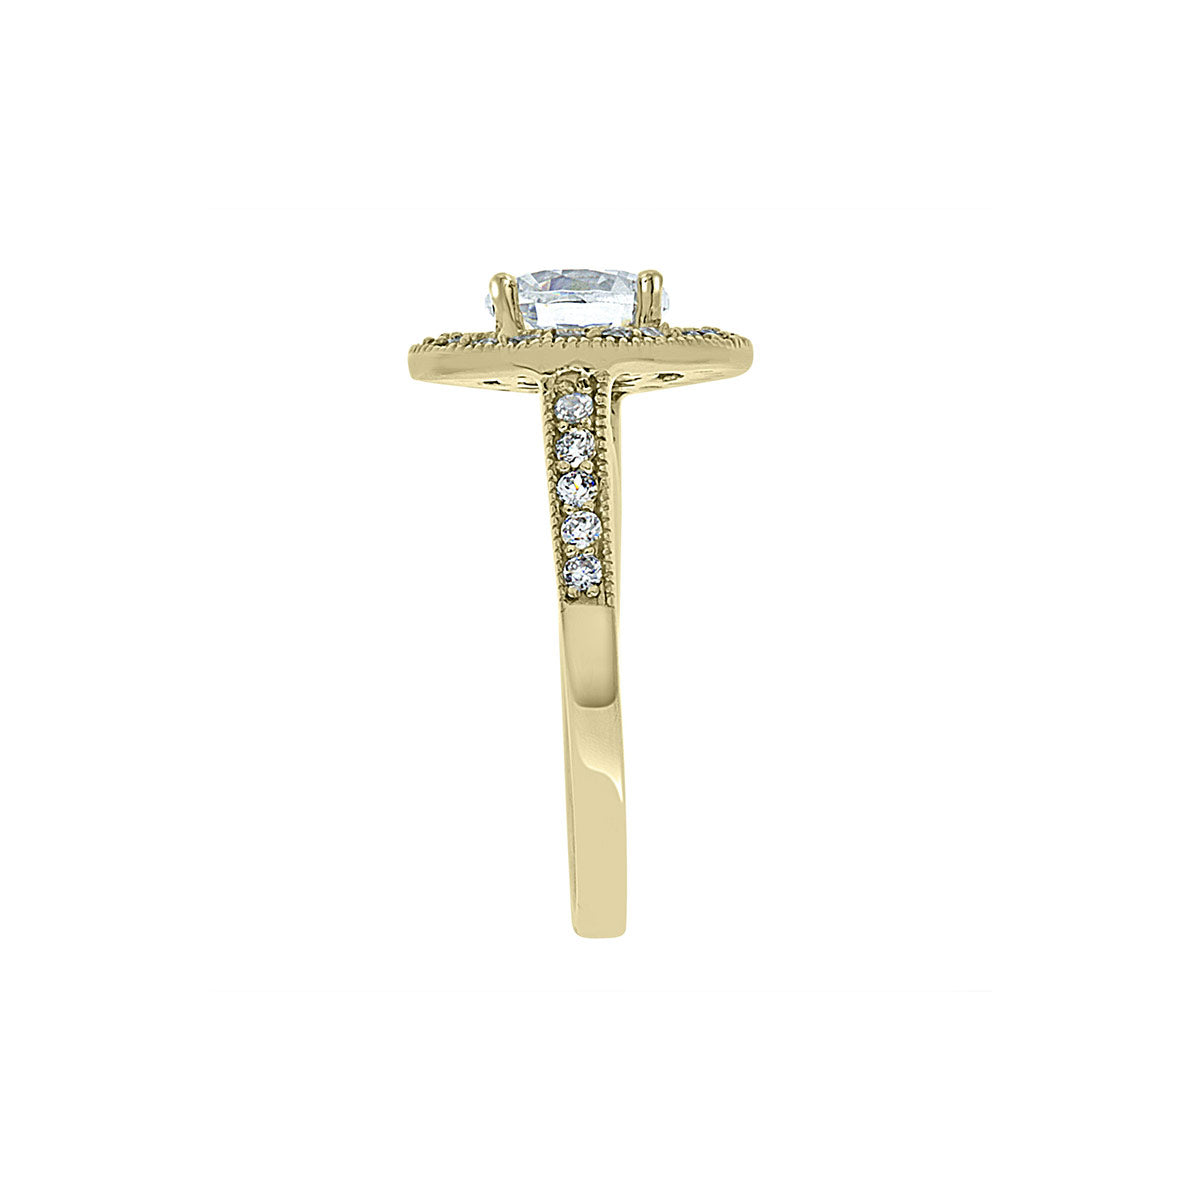 Vintage Style Ring in yellow gold Gold, standing vertical in a side view position.